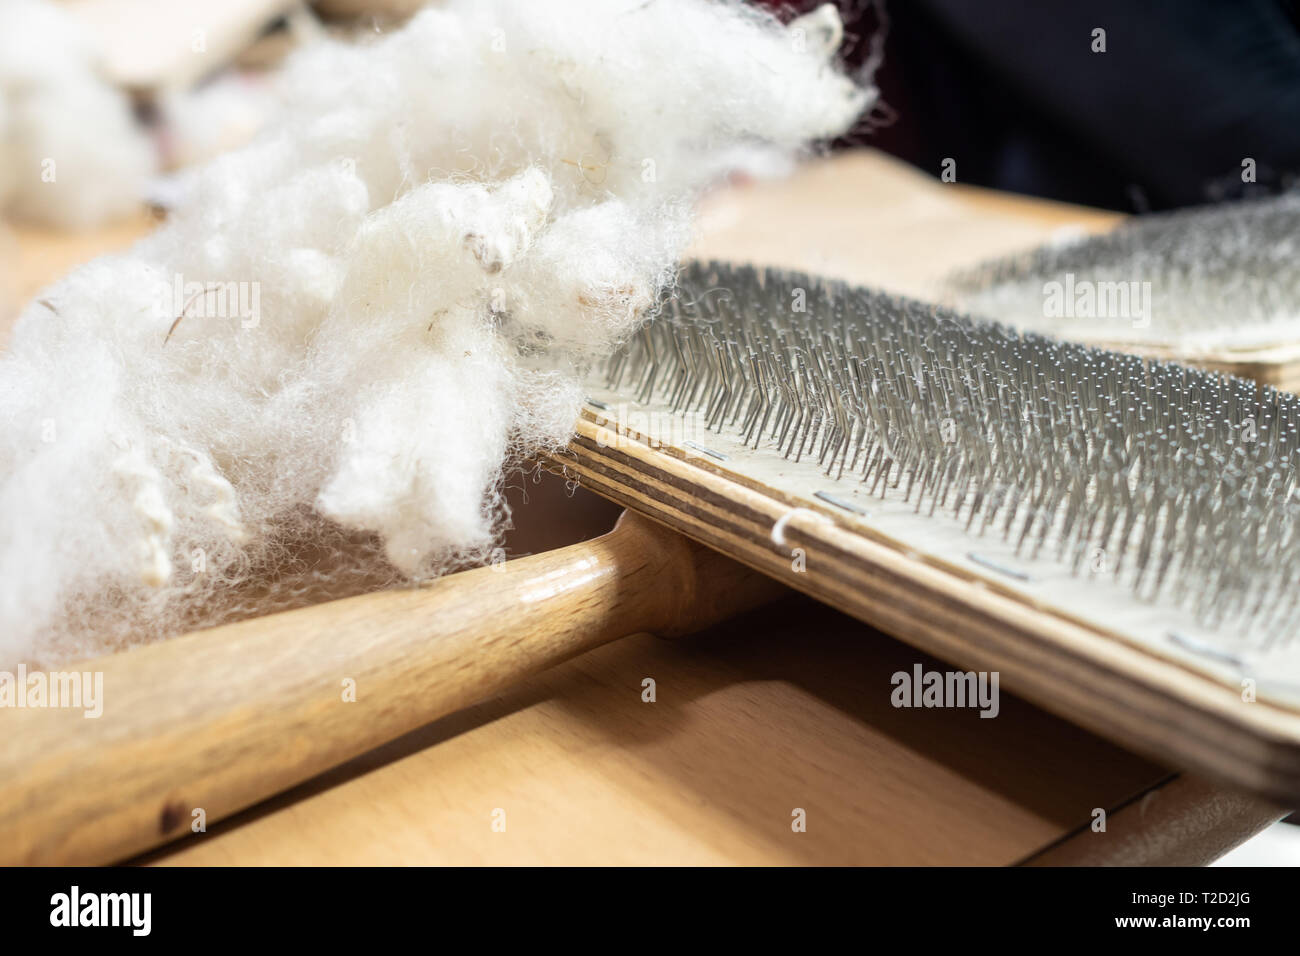 Vintage Wooden Wool Carding Comb Pair Stock Photo 1434819293